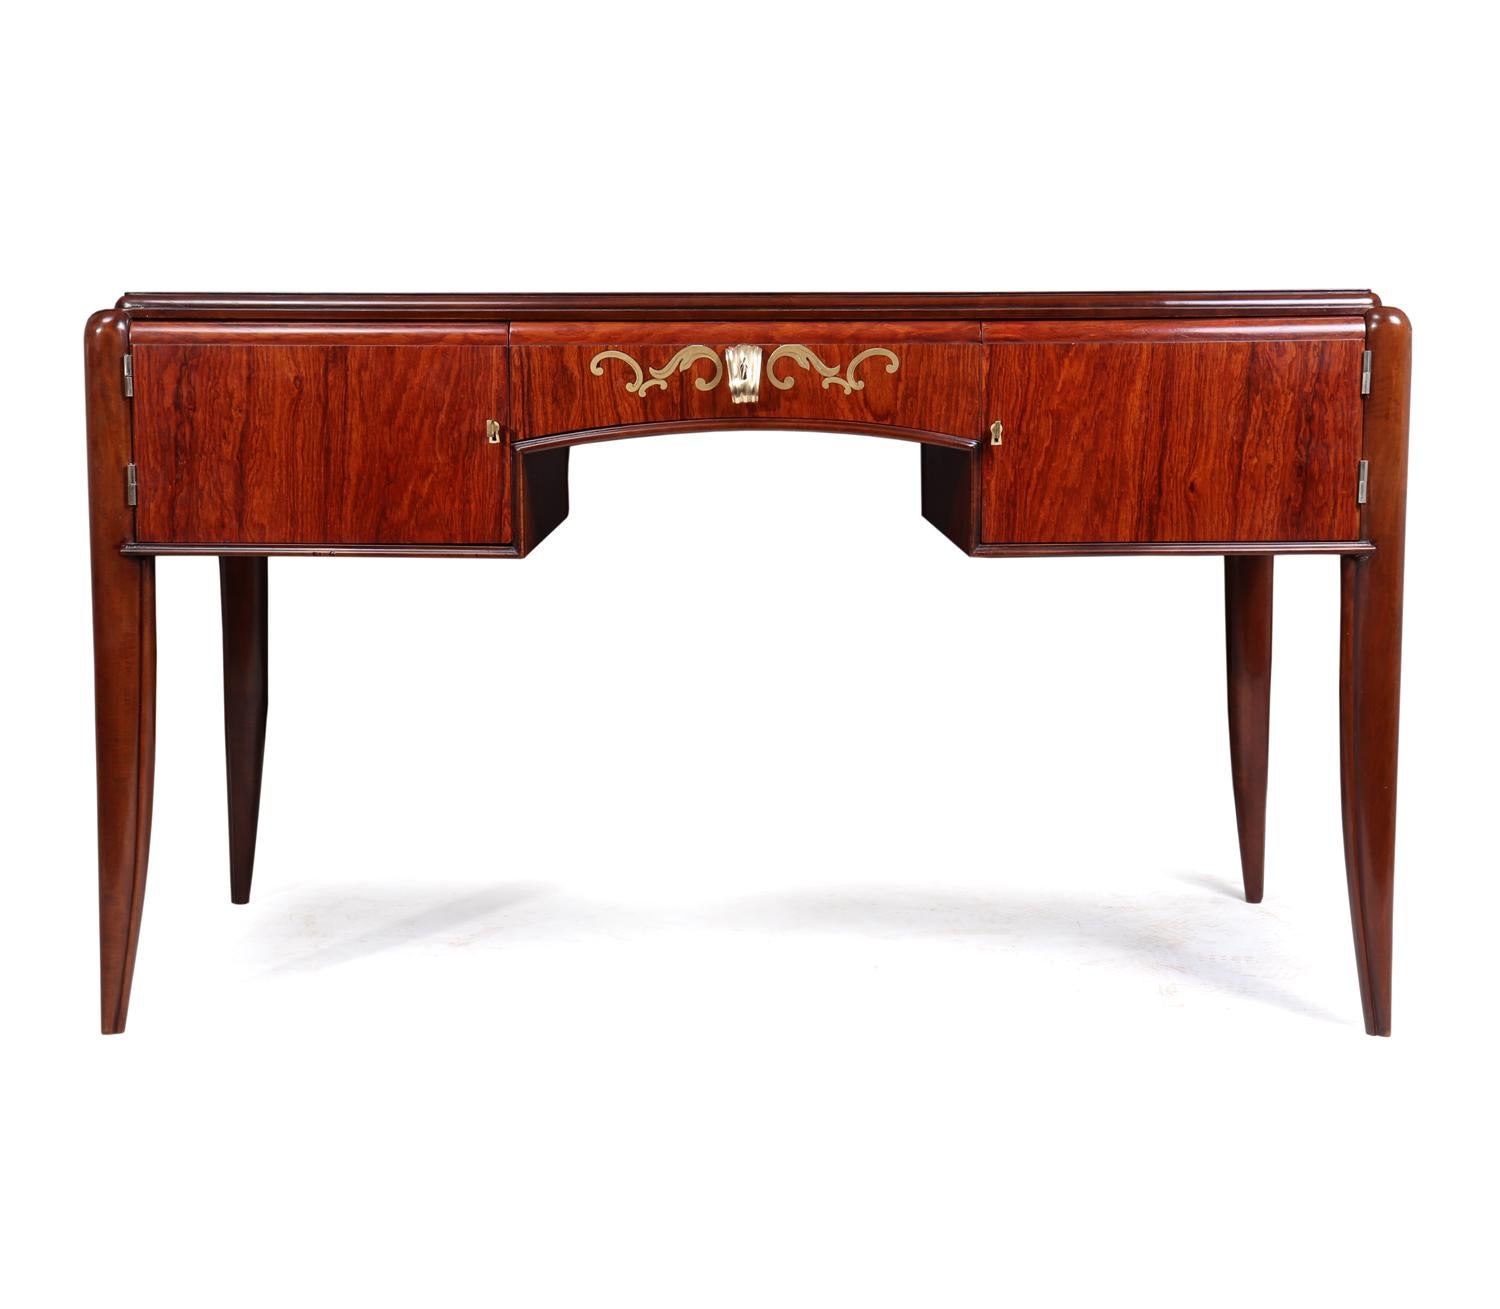 French Art Deco rosewood desk, circa 1930
A French produced Art Deco Desk with two lockable doors and a central lockable drawer, the desk is in lovely condition trough-out and has been sympathetically restored and professionally hand